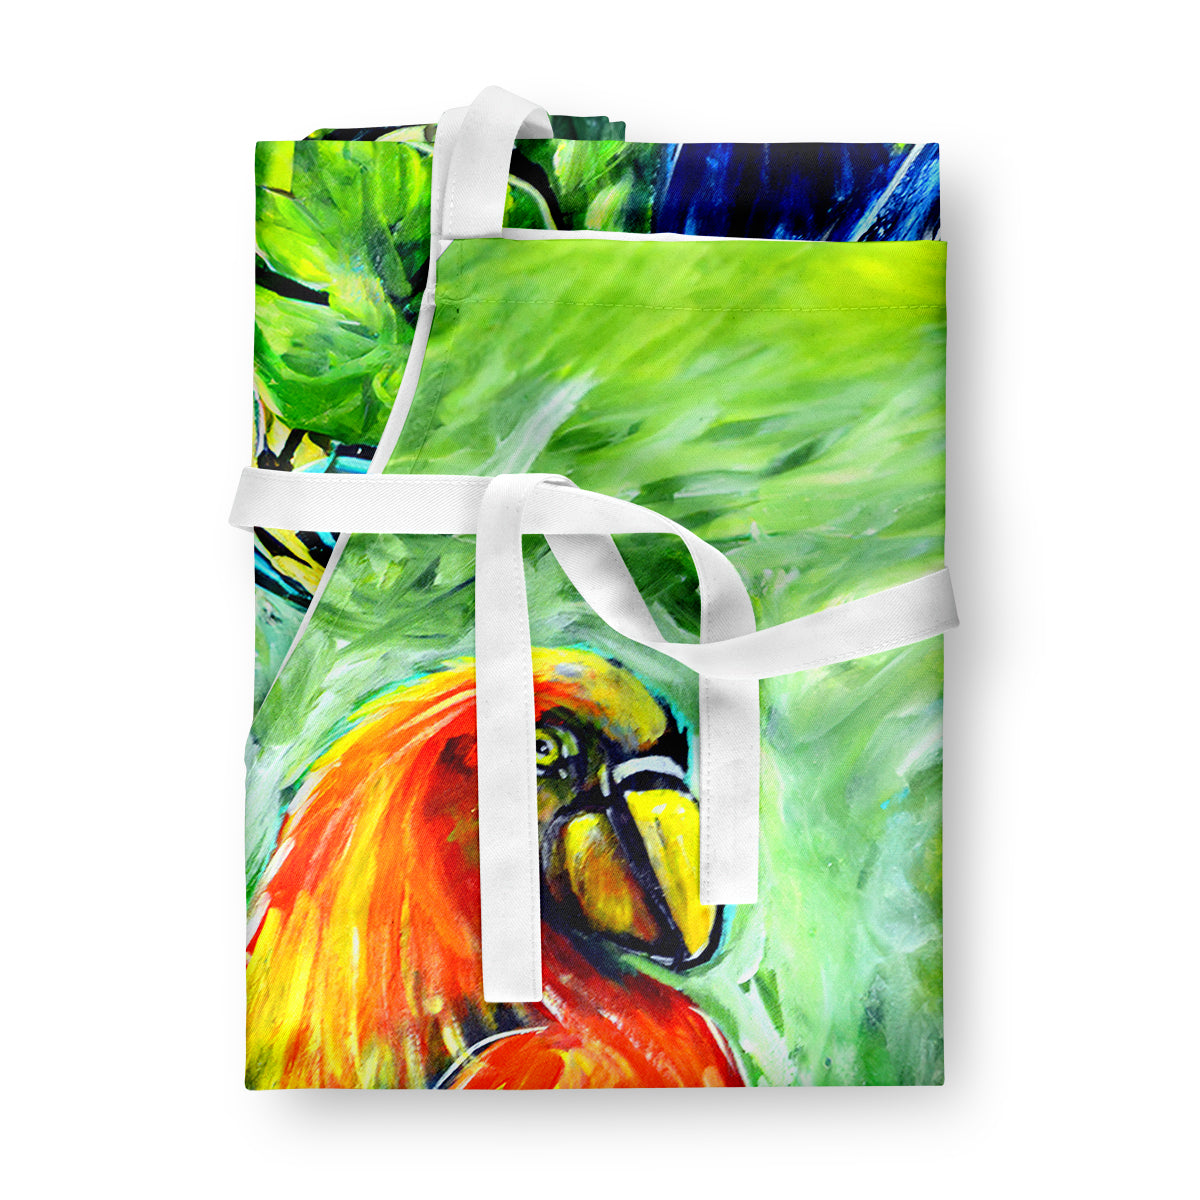 Fred and Freda Parrots Apron